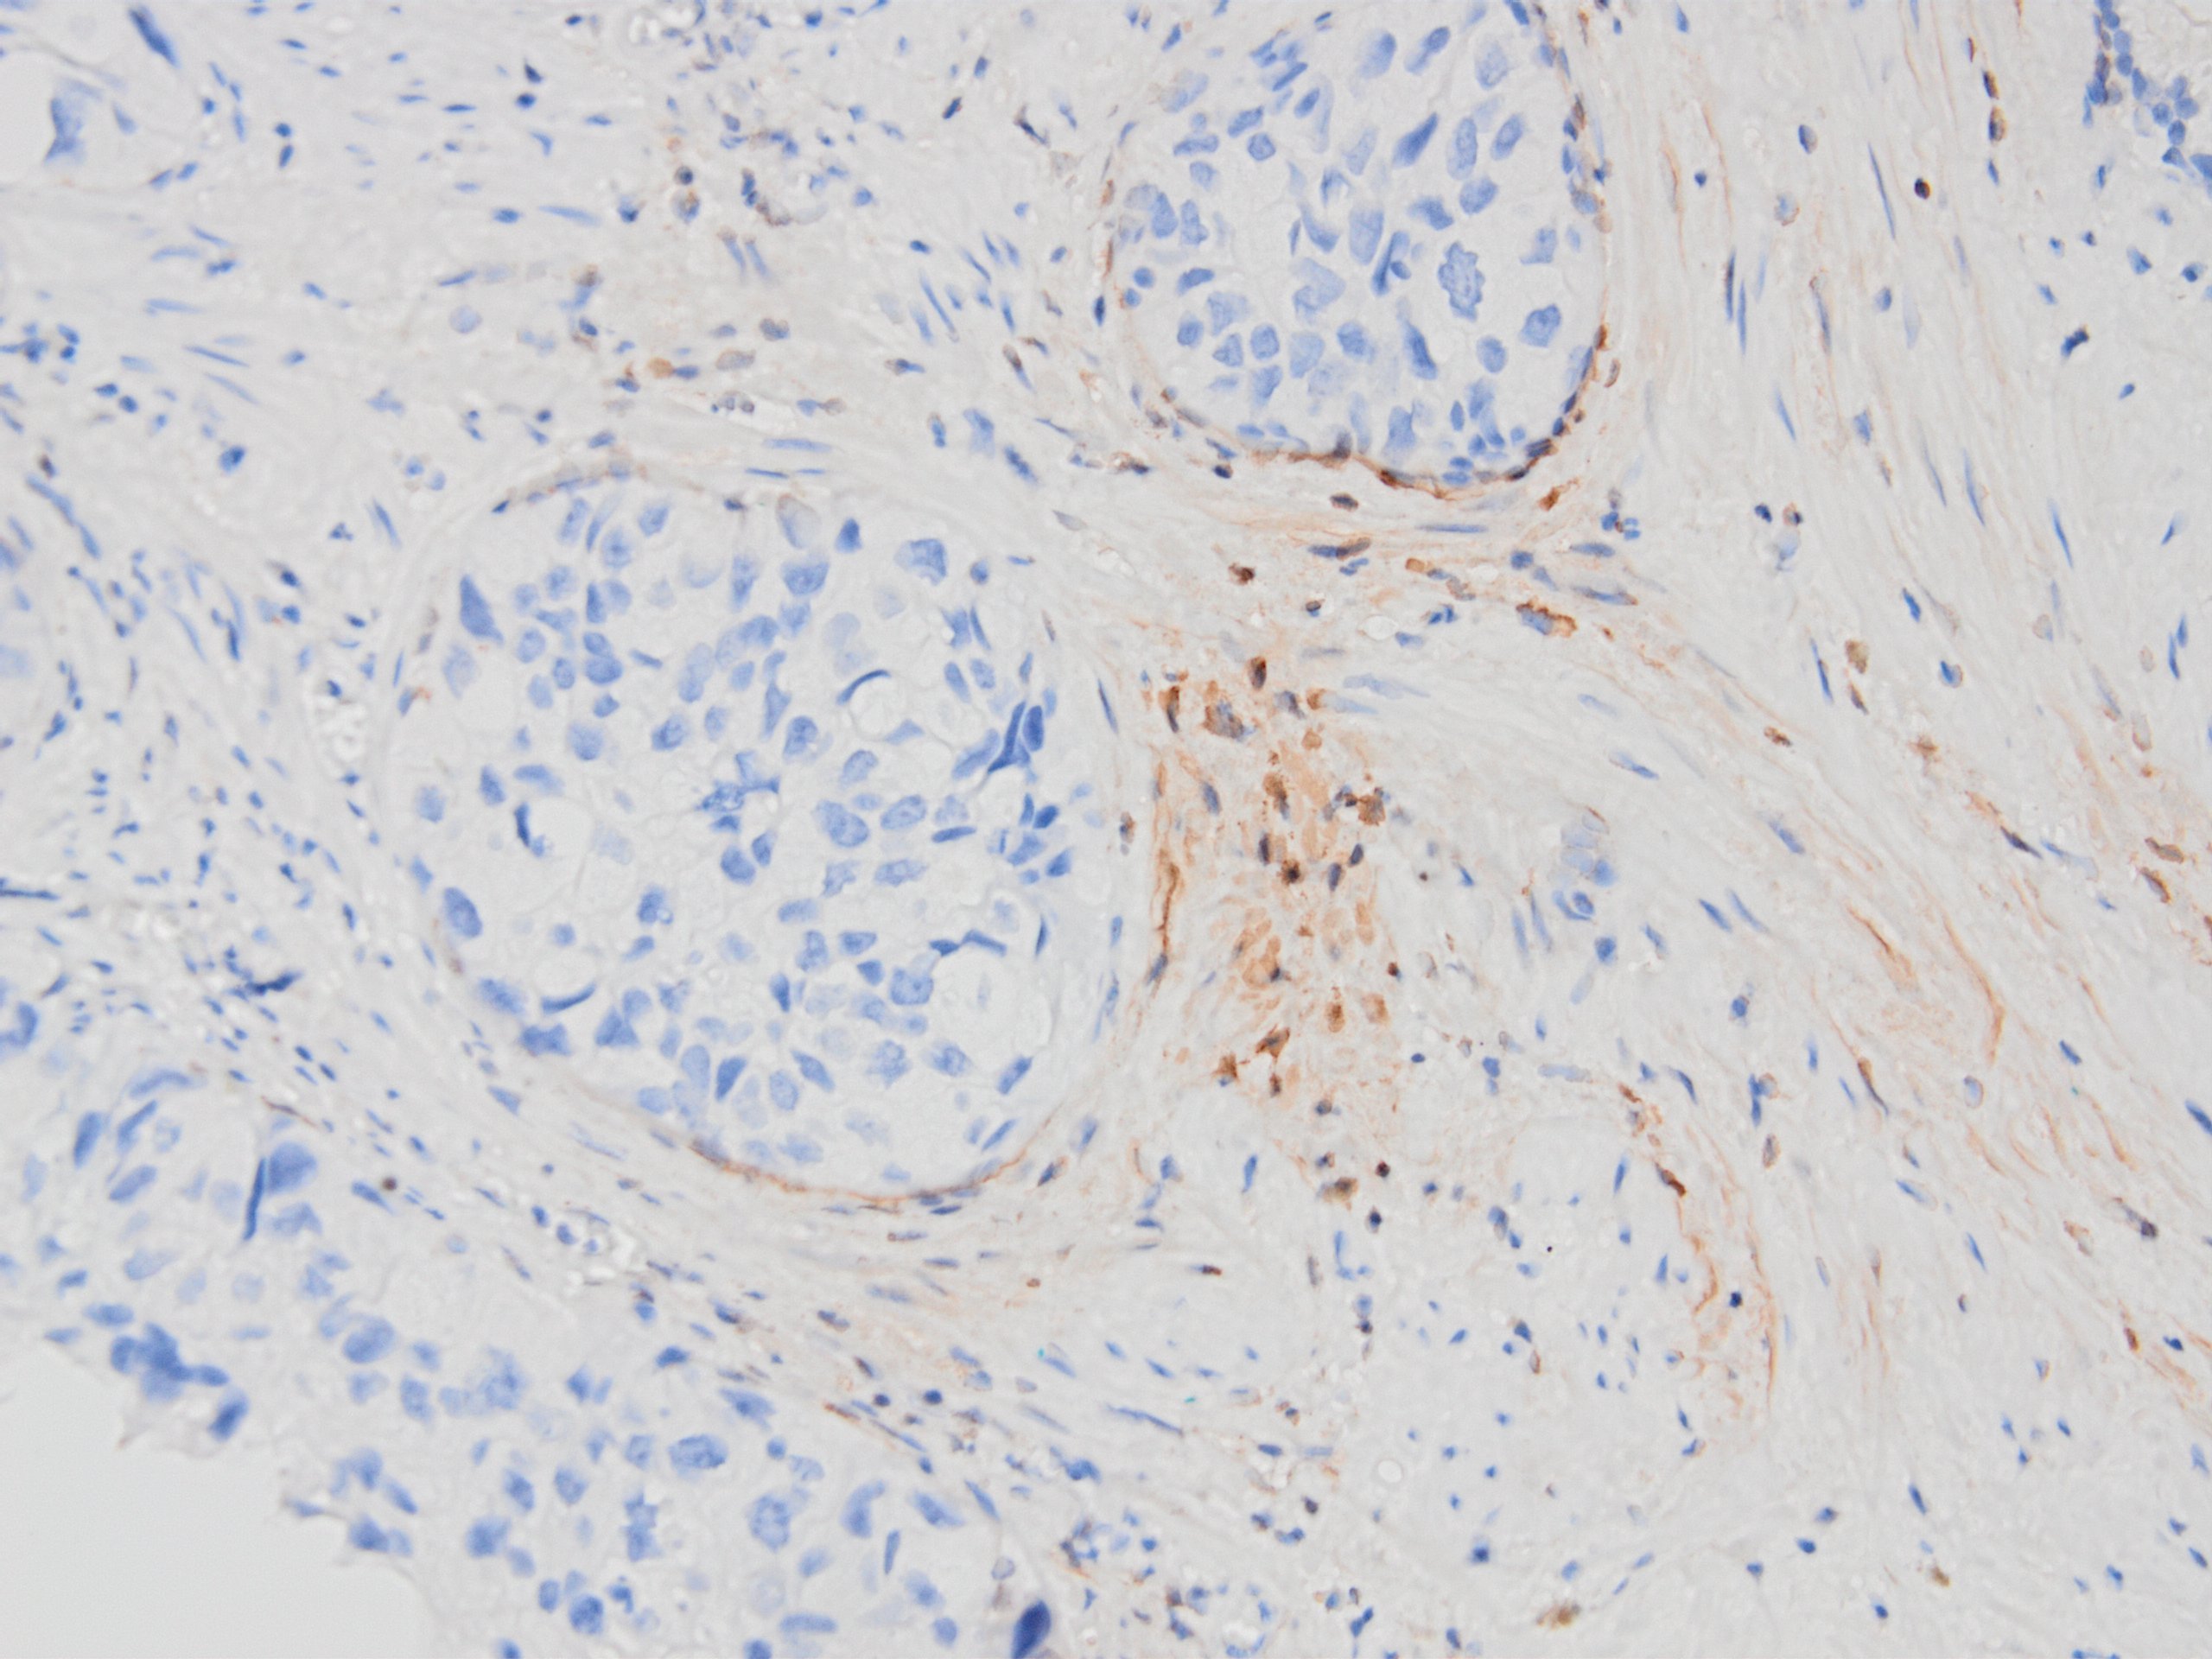 D2-40 in prostate basal cells